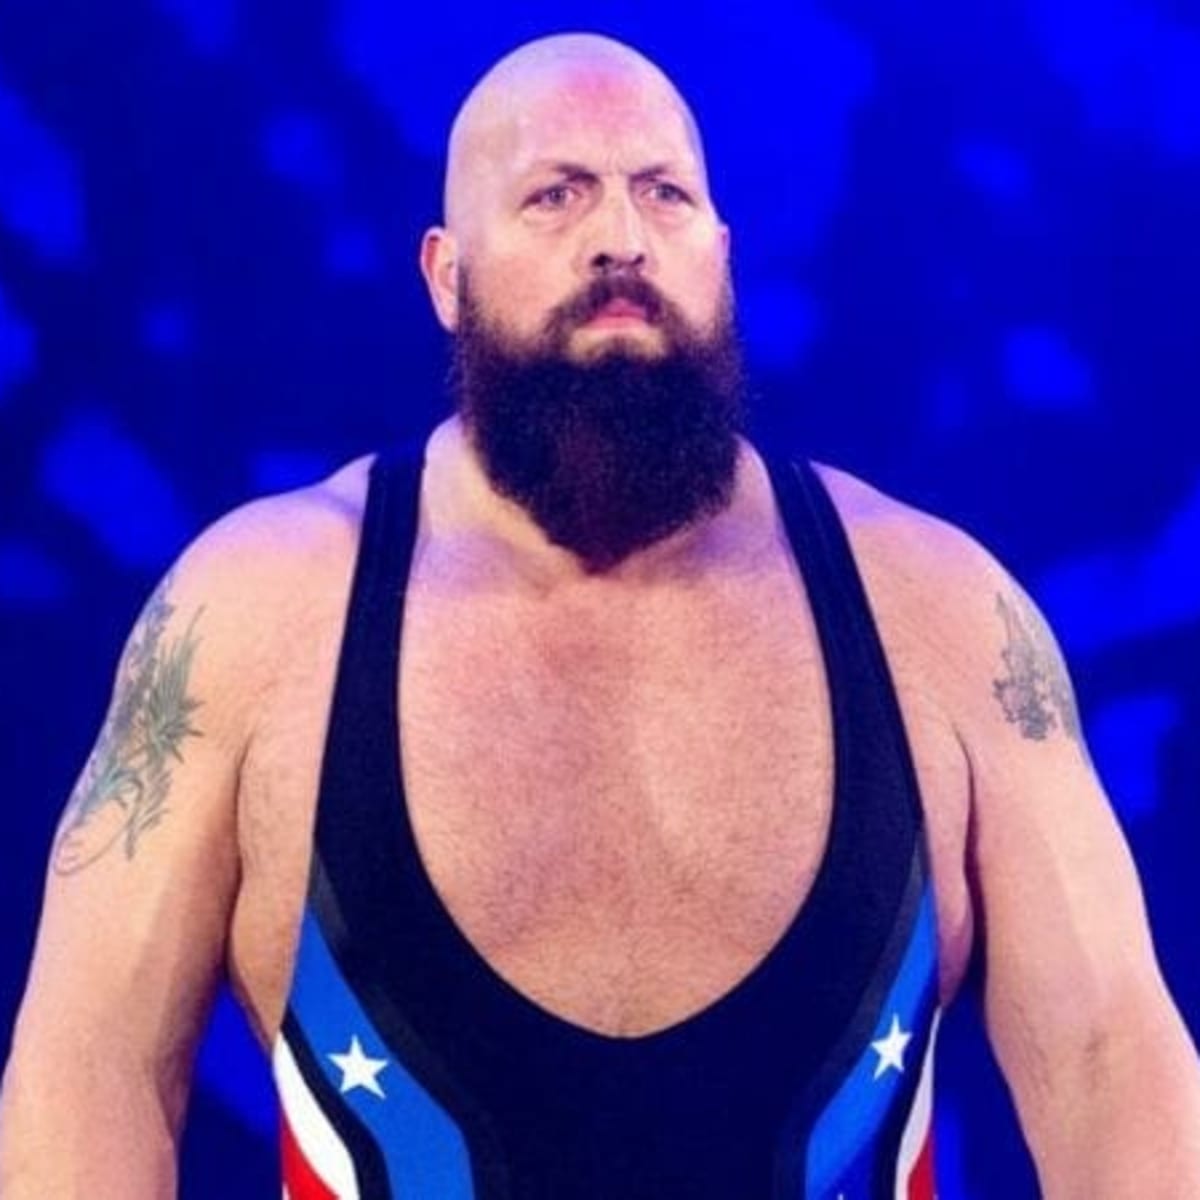 The Big Show Talks Returning to the Ring, Randy Orton and His